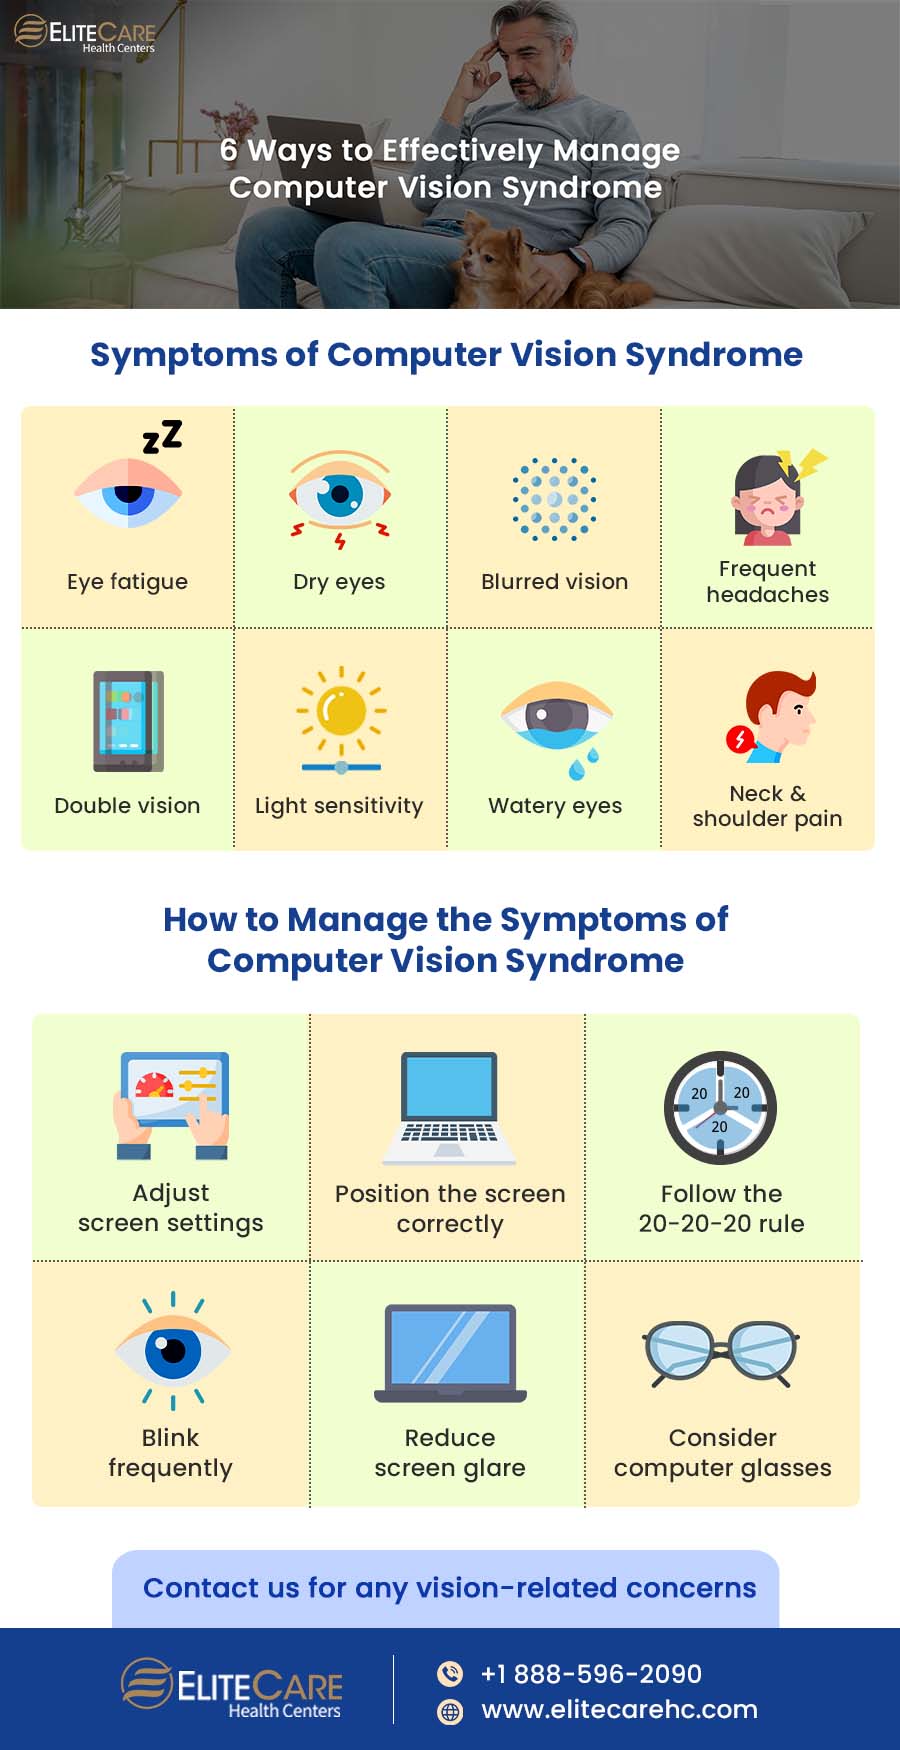 6 Ways to Effectively Manage Computer Vision Syndrome | Infographic